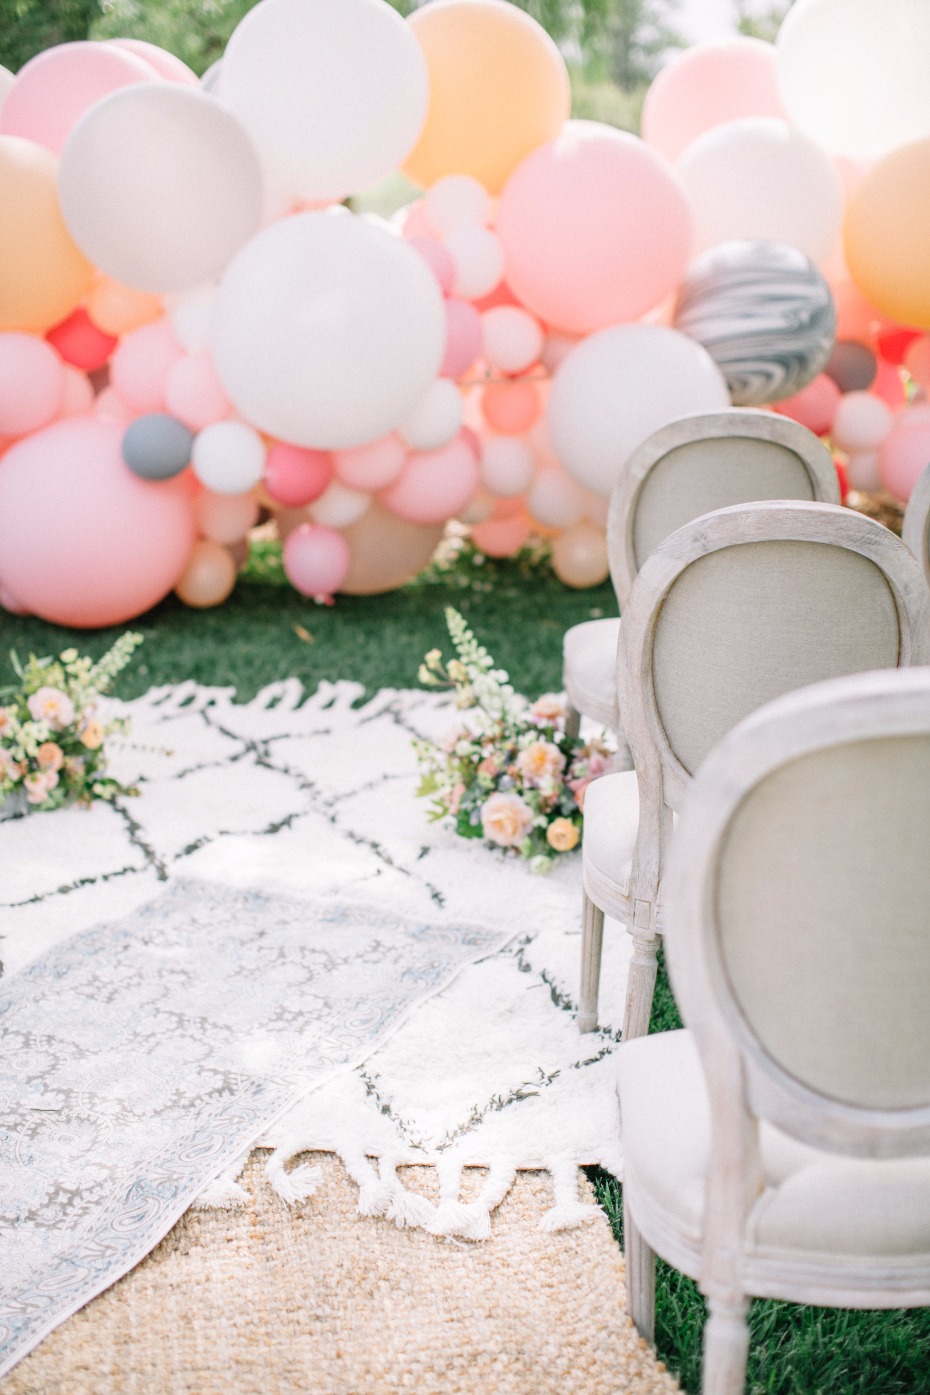 Chic ceremony with rugs and balloons